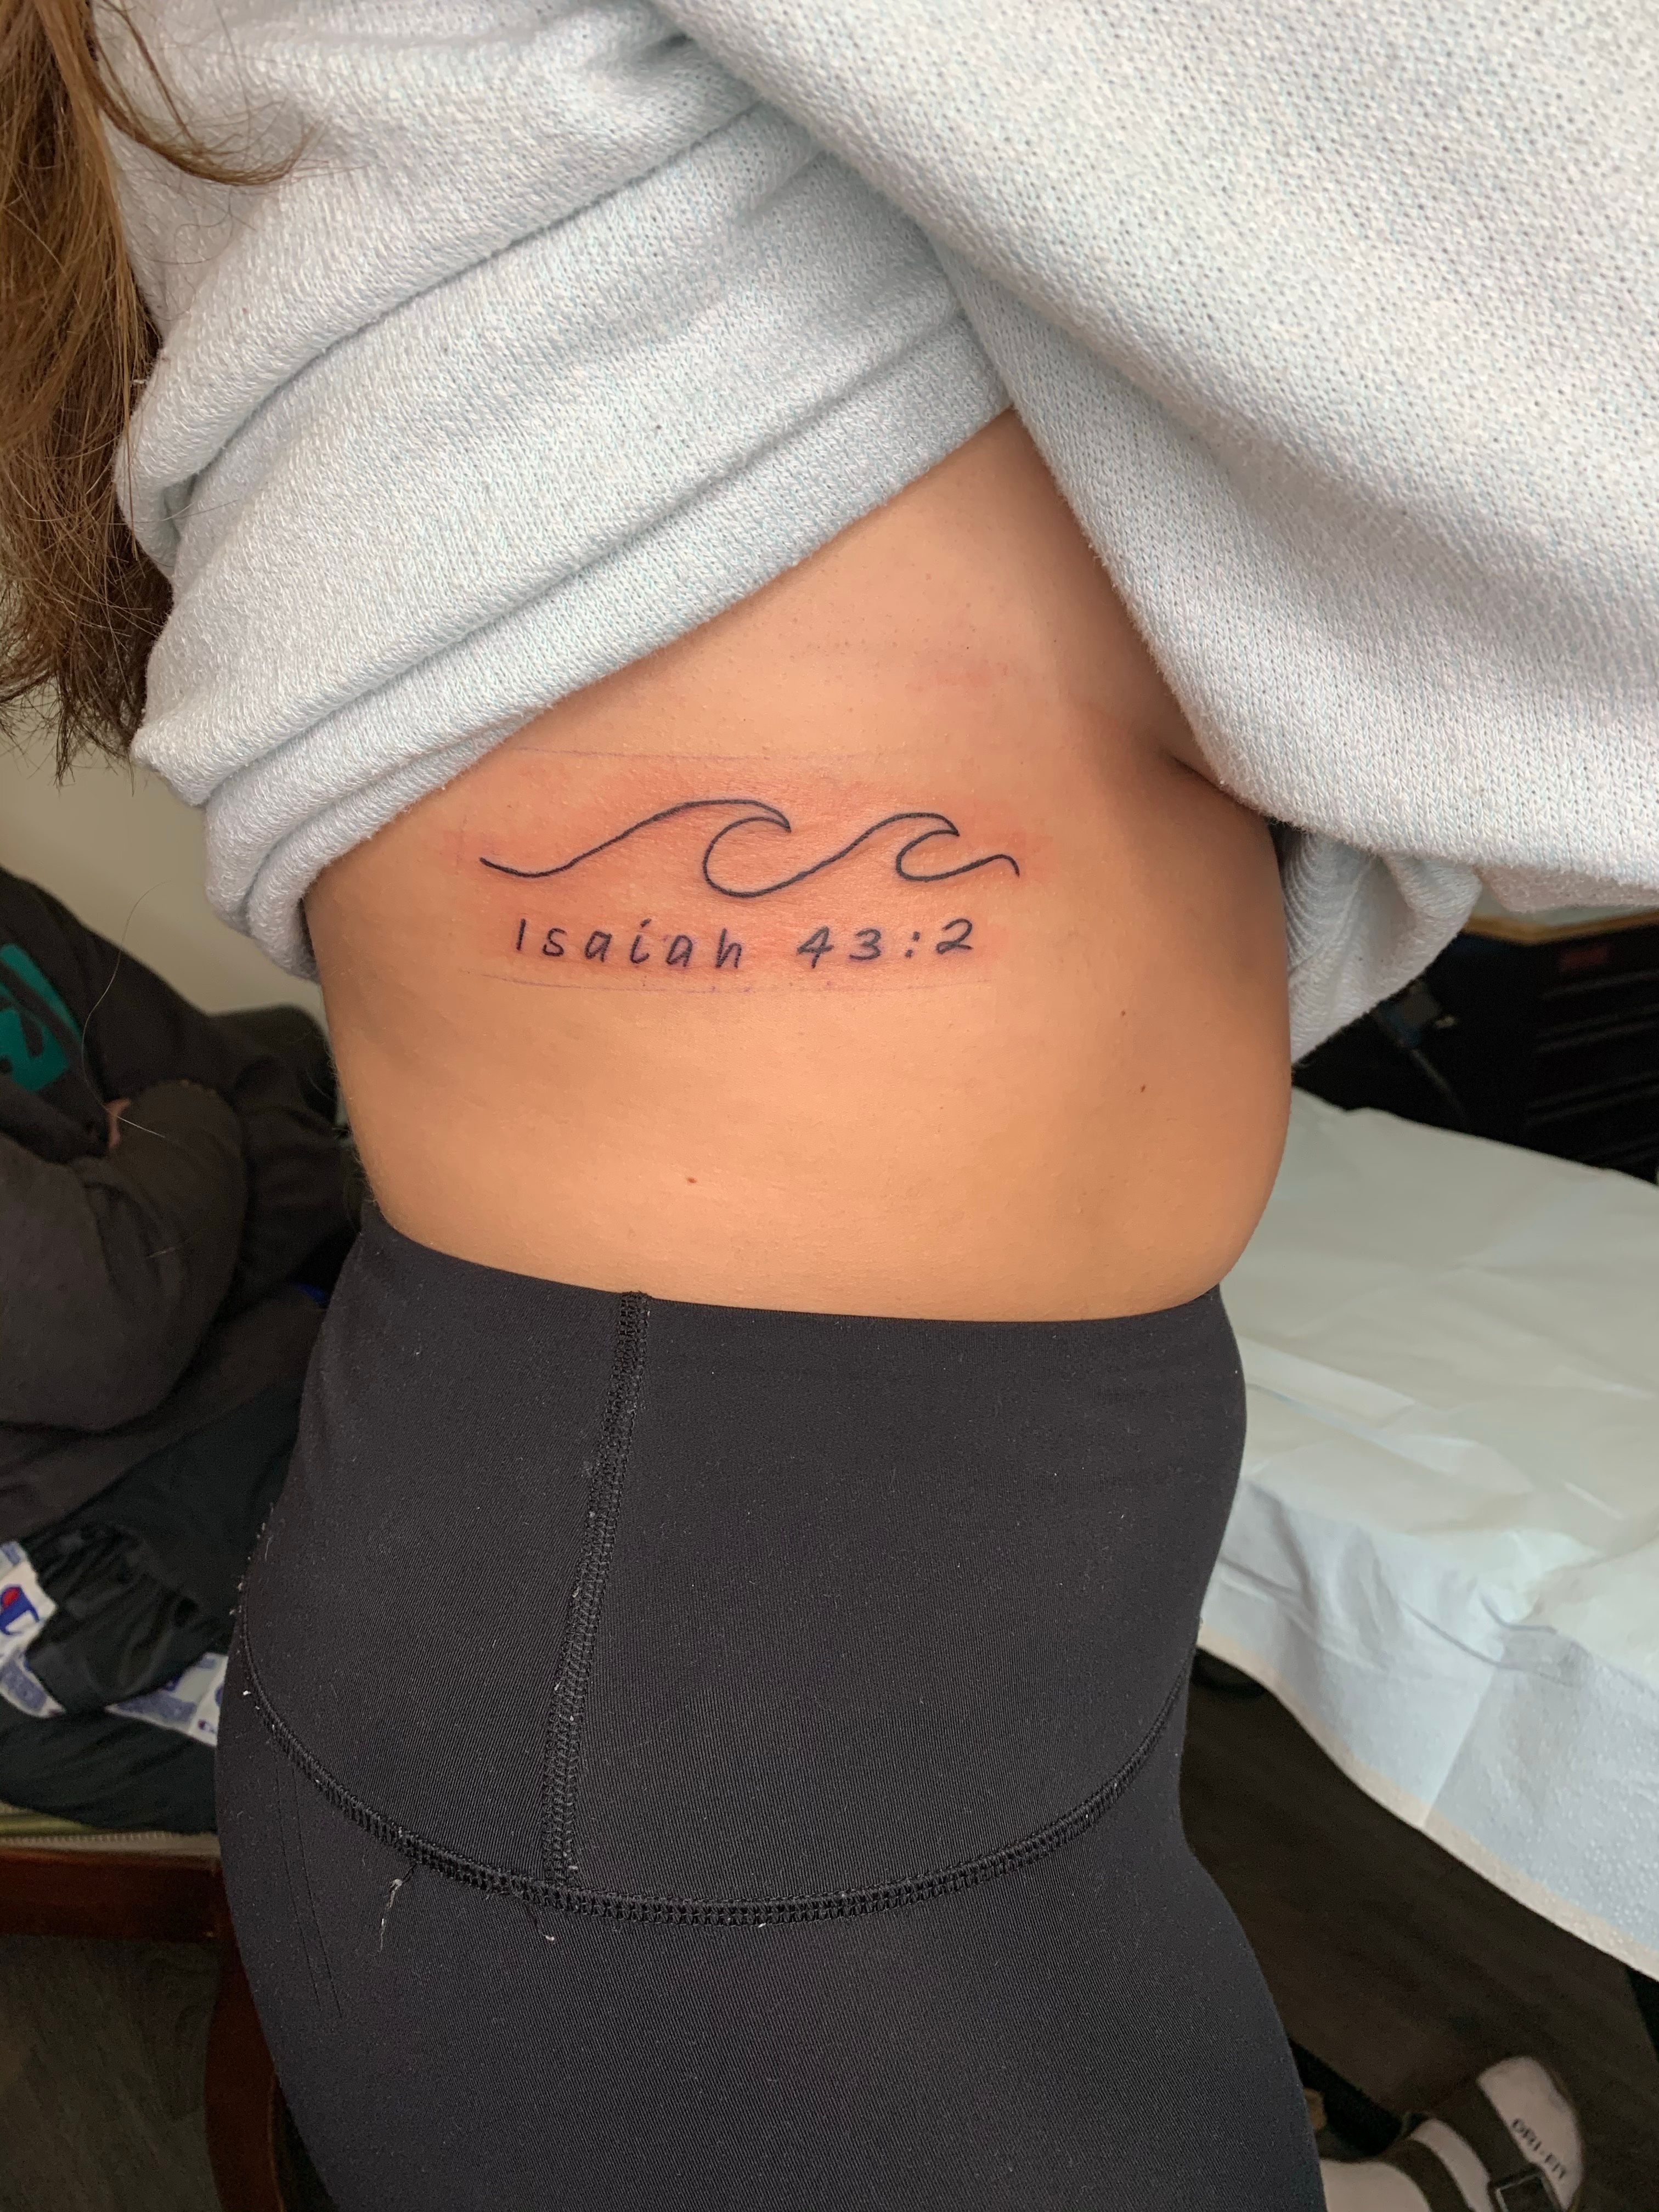 Isaiah 4110 scripture script tattoo added a few clouds to fill it  out iwhipscript tattoosbytattoology getinmy   bibleverse  By Tatto ology  Facebook